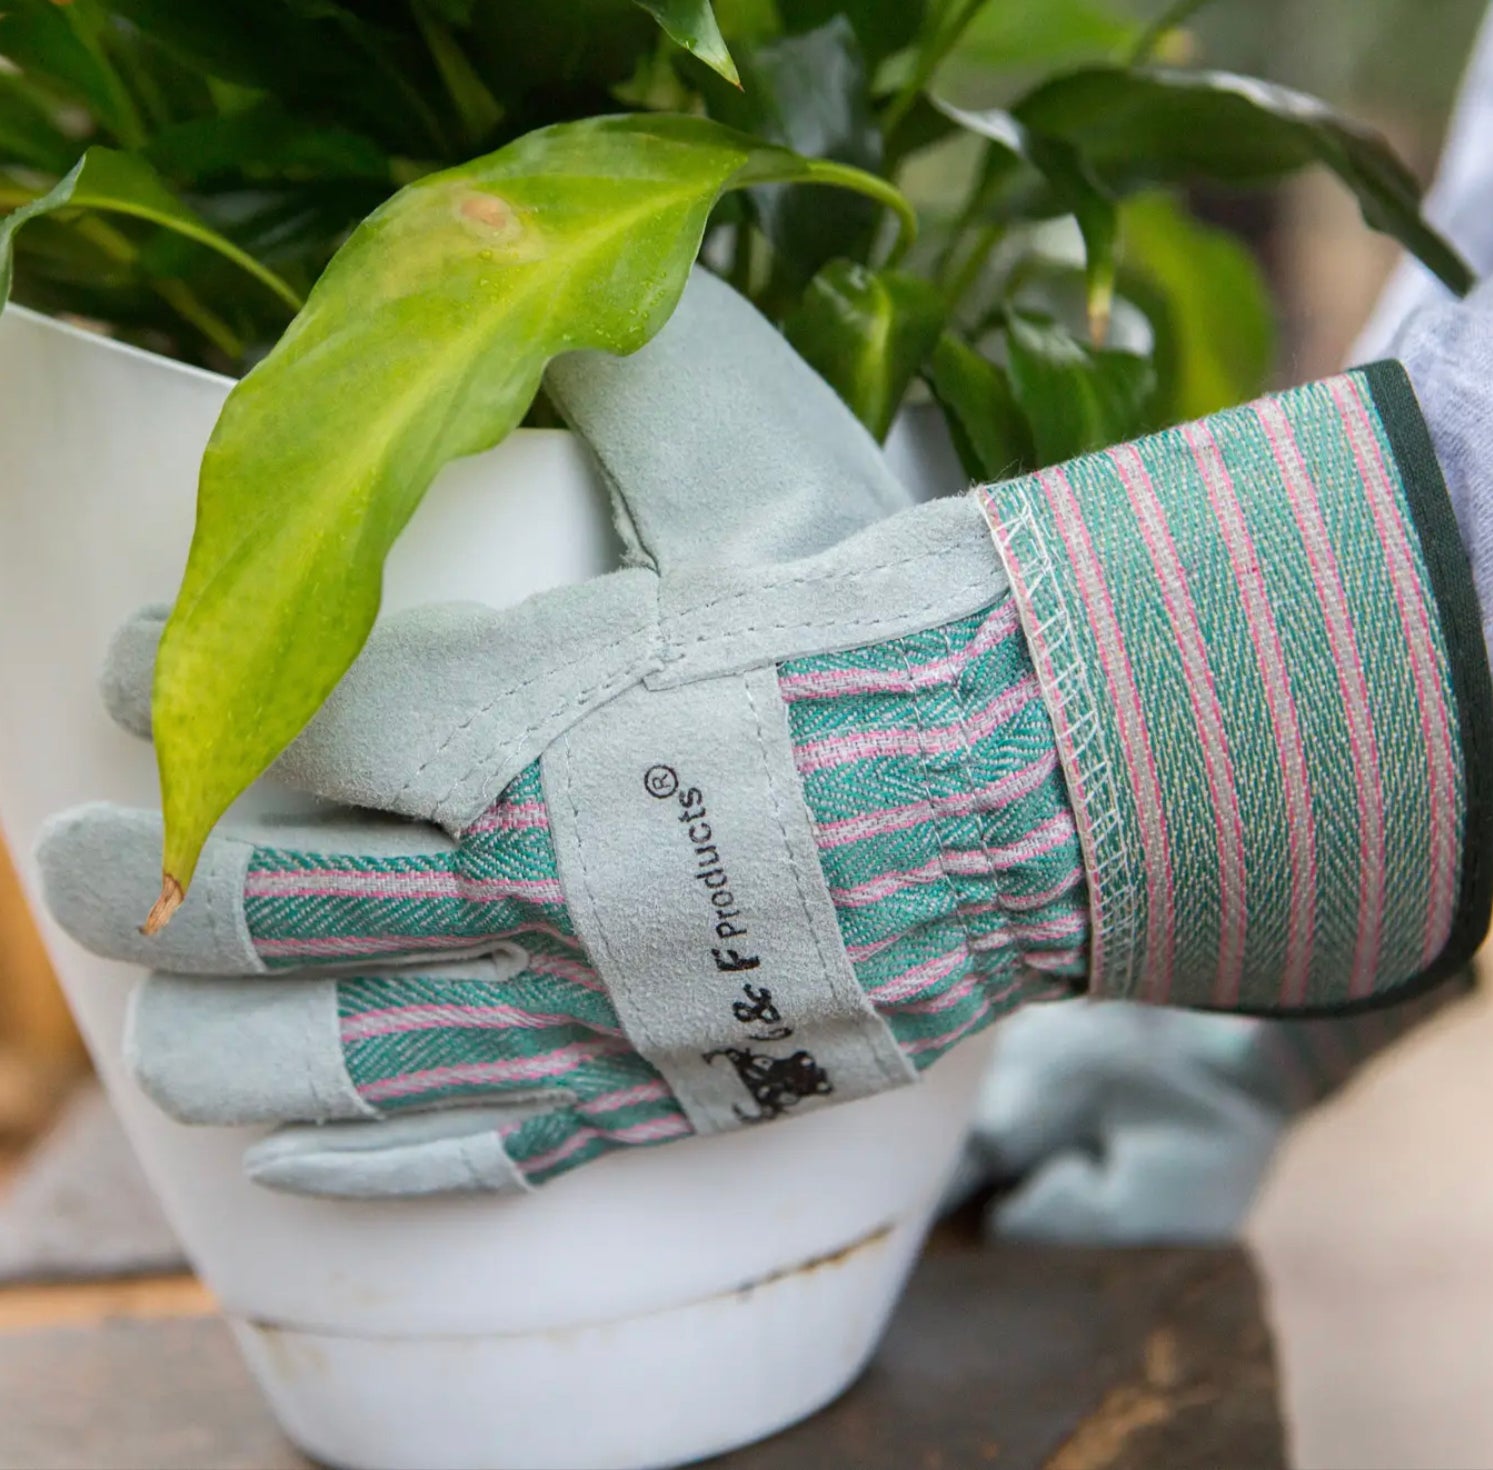 Kids Gardening / Work Gloves - Leather and Canvas